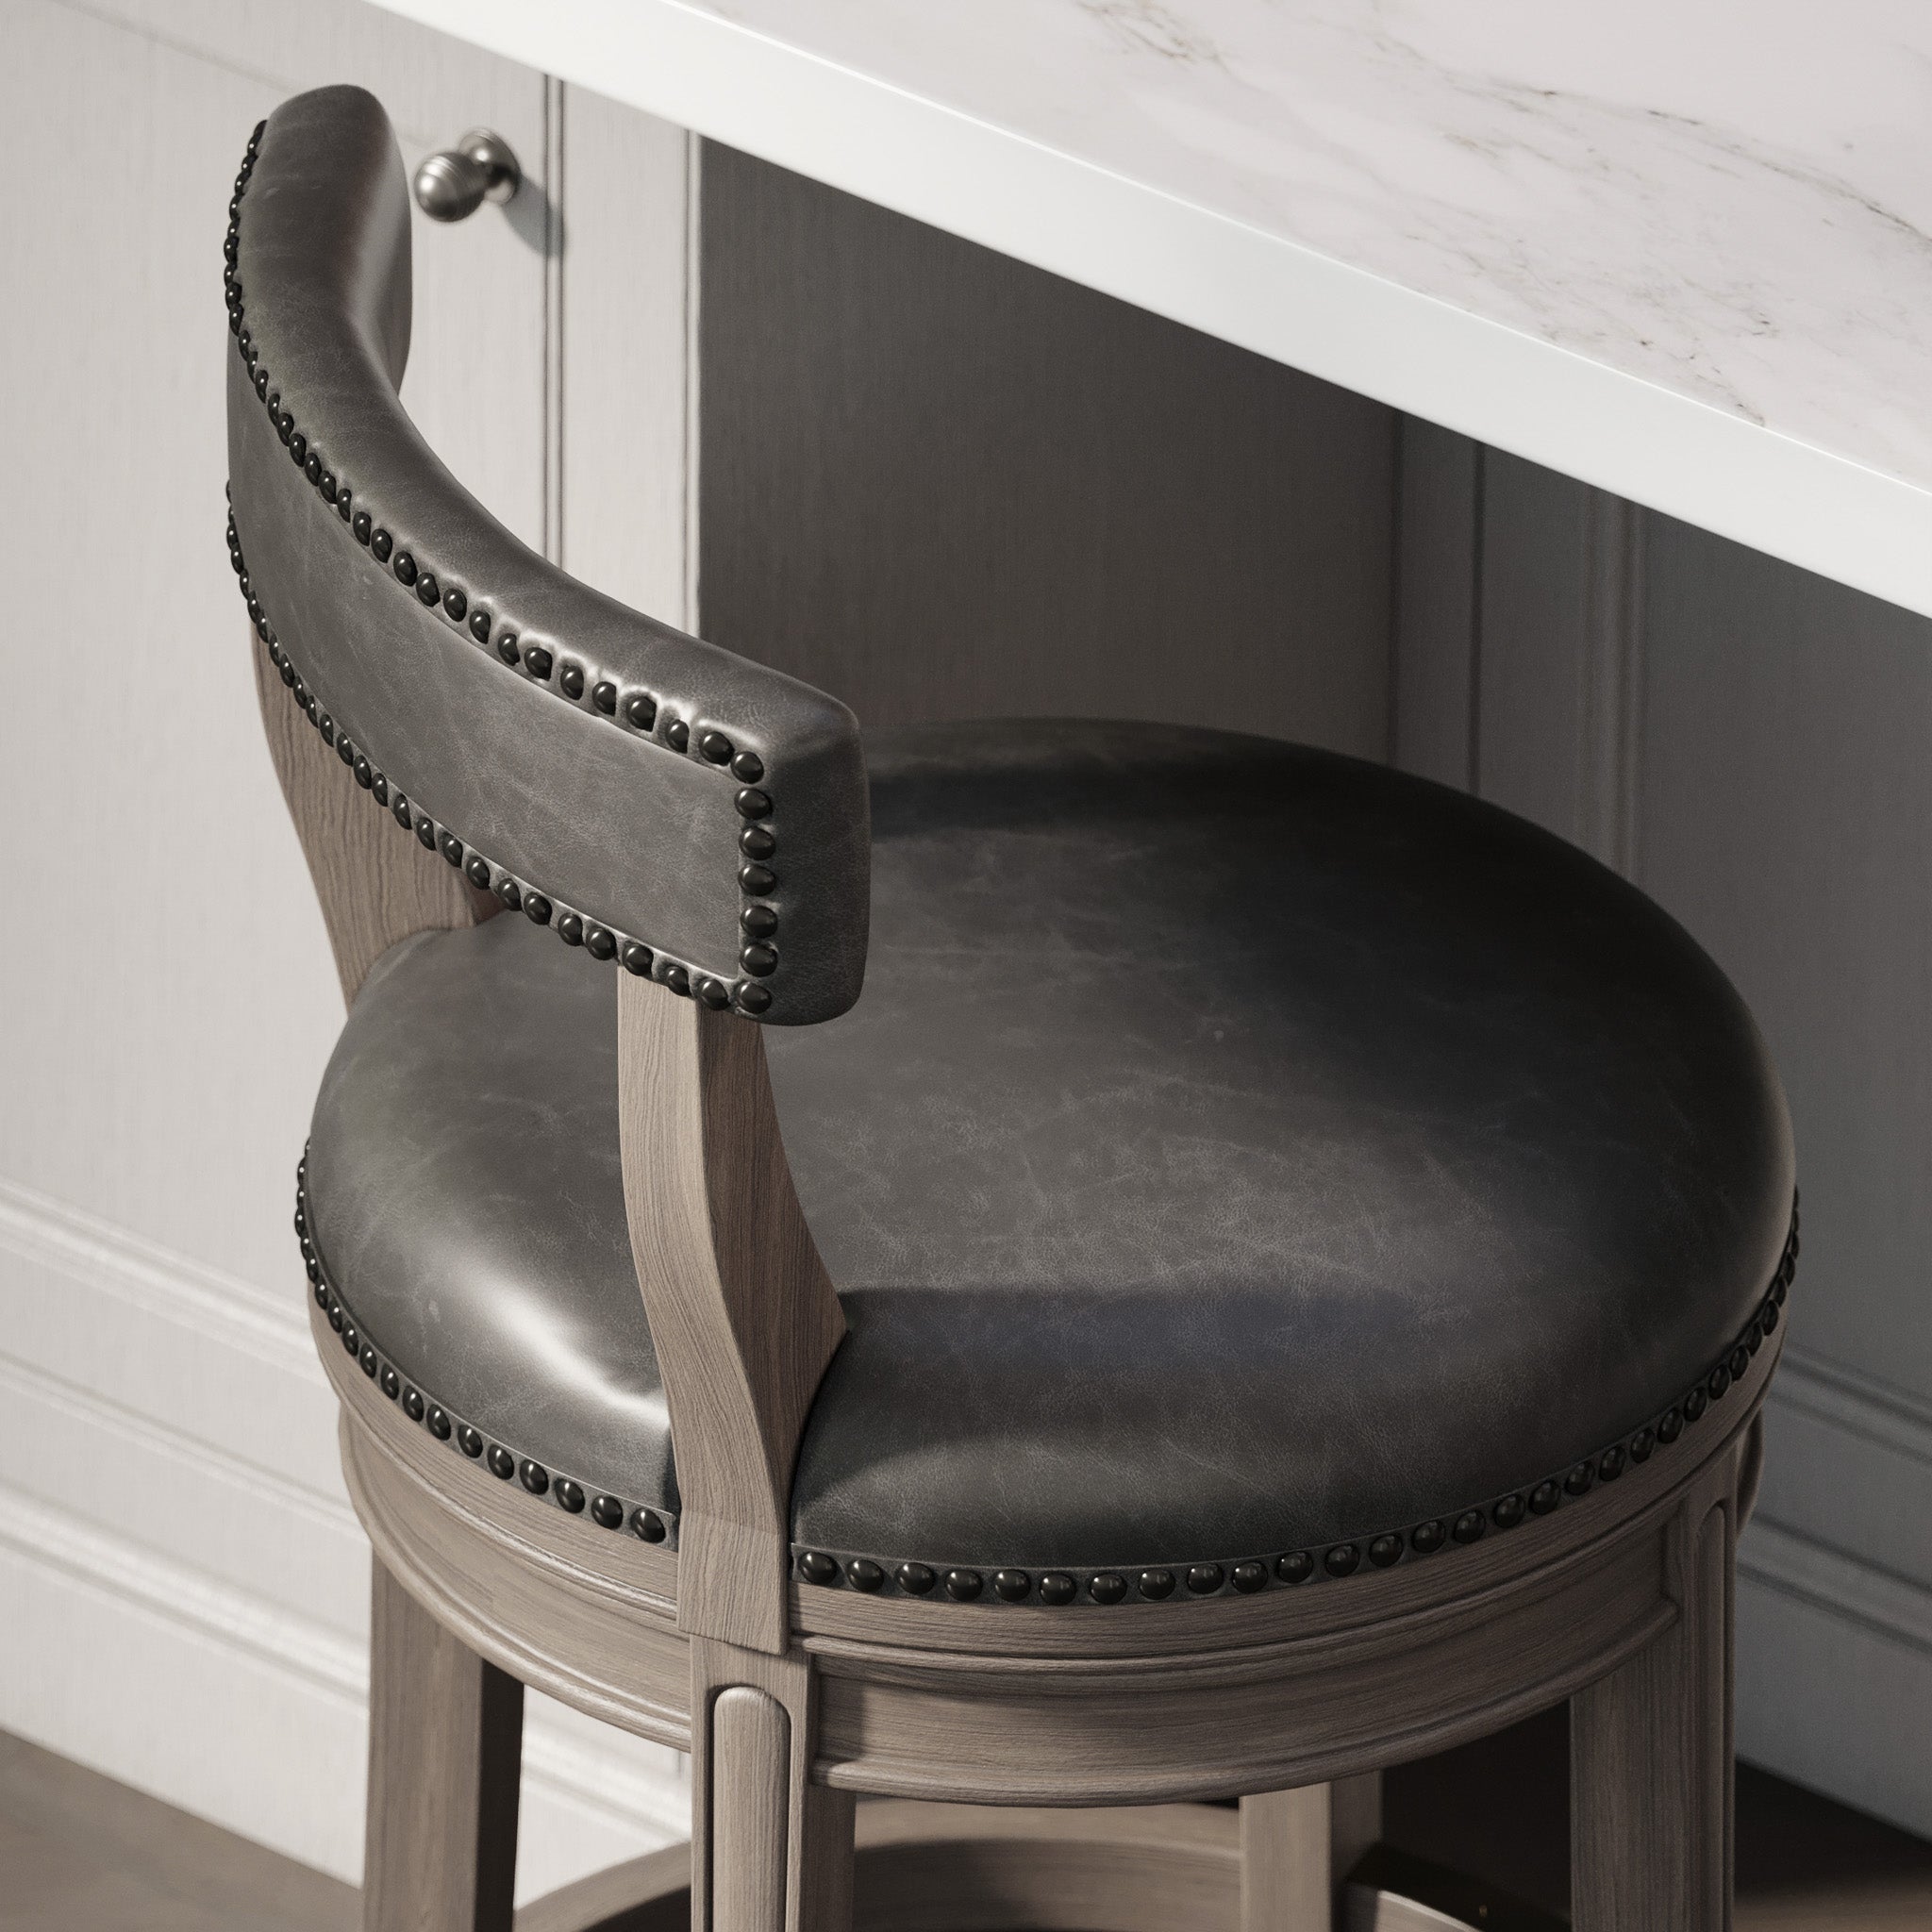 Alexander Counter Stool in Reclaimed Oak Finish with Ronan Stone Vegan Leather in Stools by Maven Lane